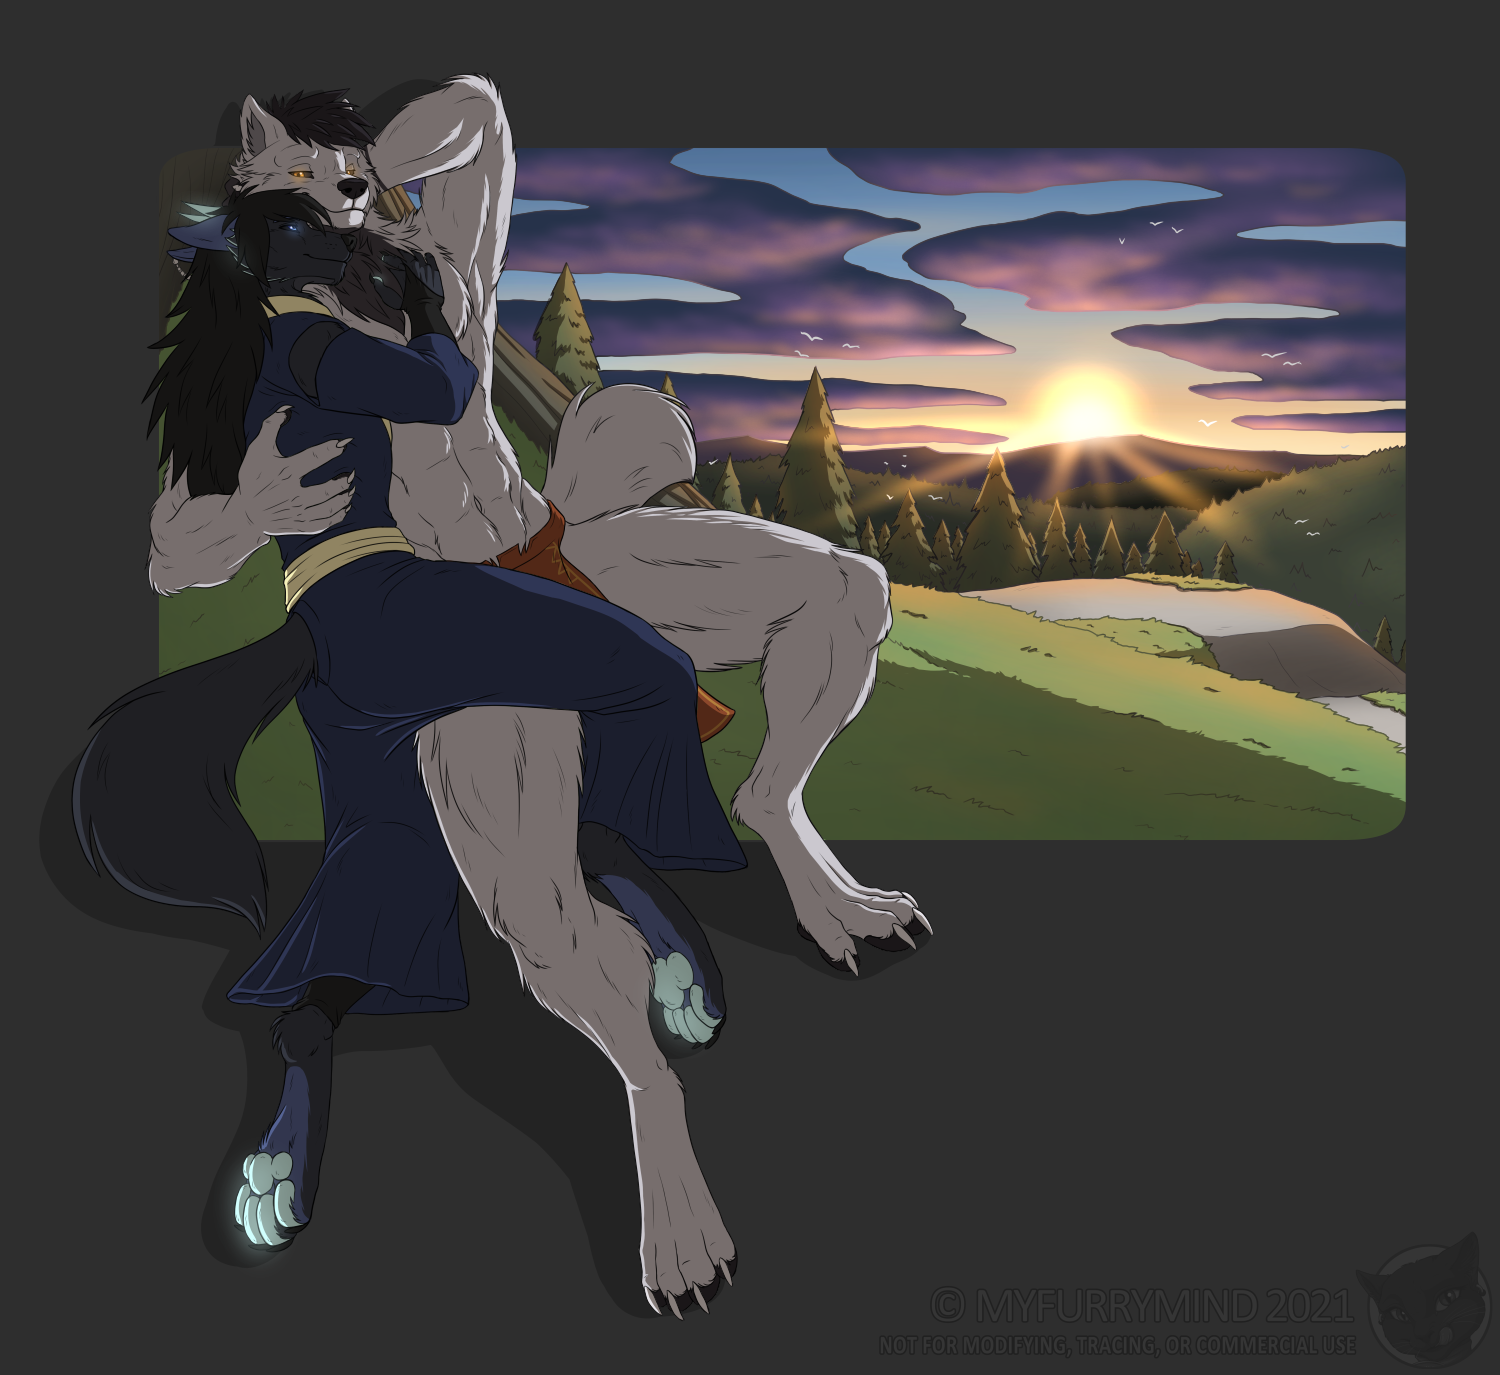  Comm: Lycaoz And Faolan for Mystael